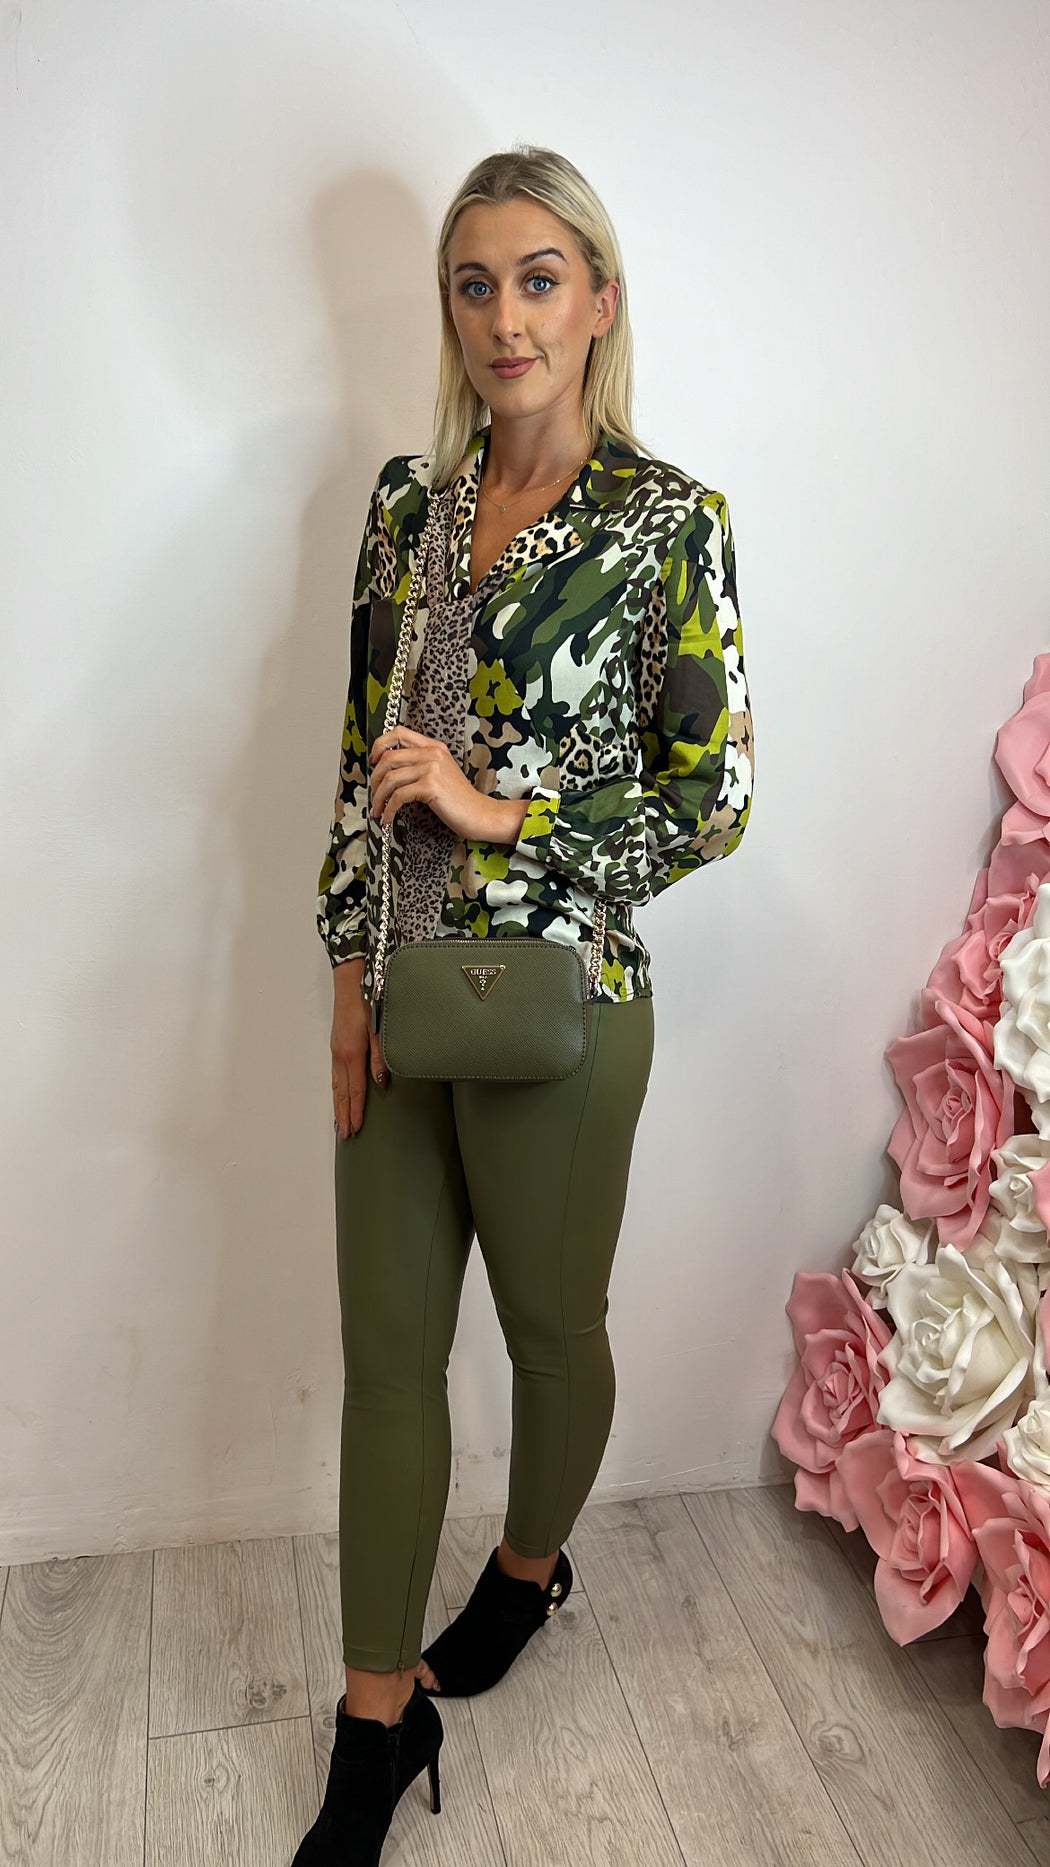 Green Priscilla guess faux leather trousers